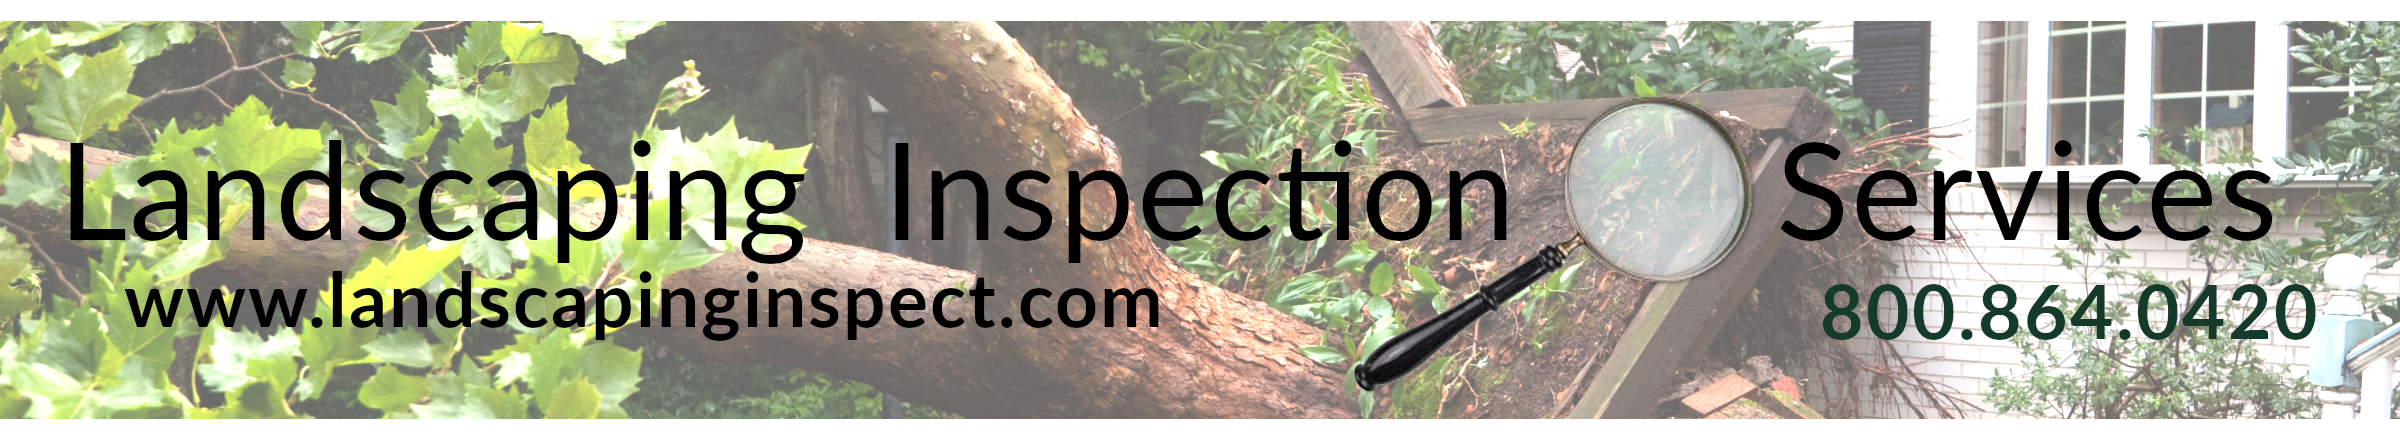 Landscaping Inspection Services